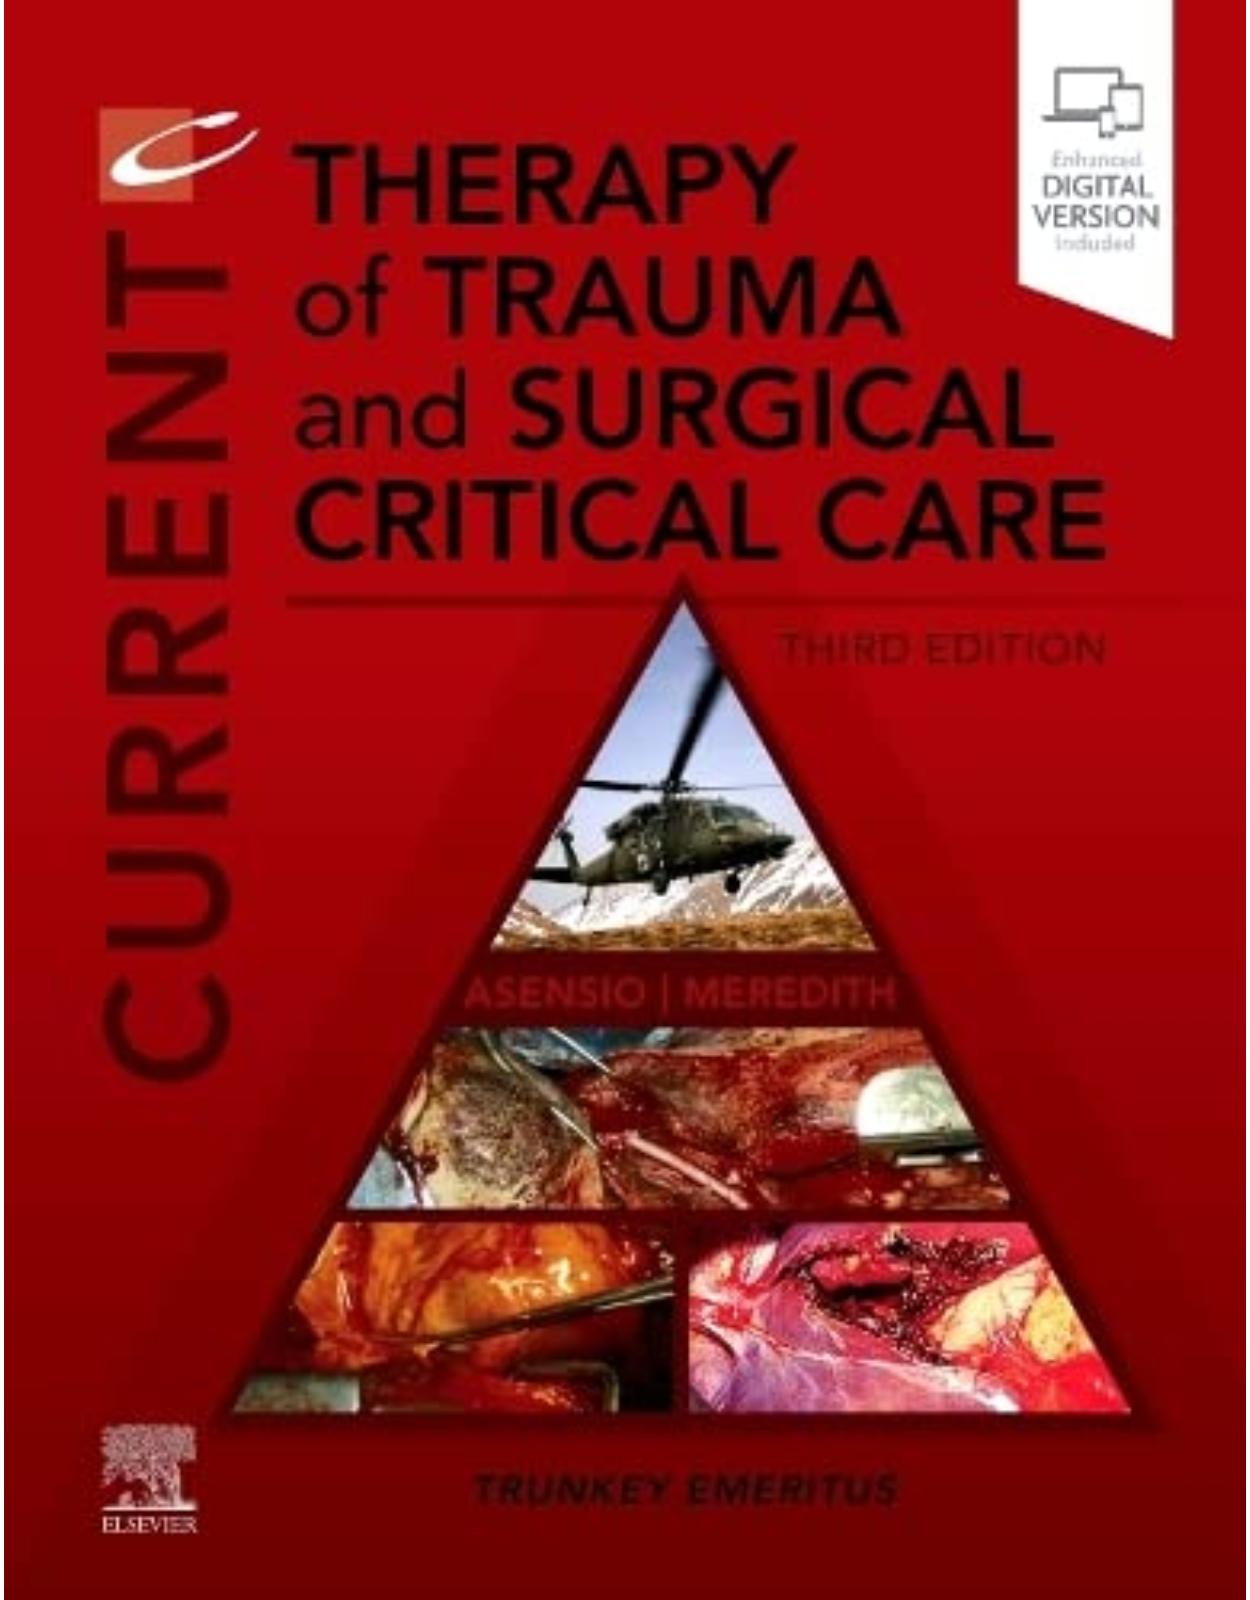 Current Therapy of Trauma and Surgical Critical Care 